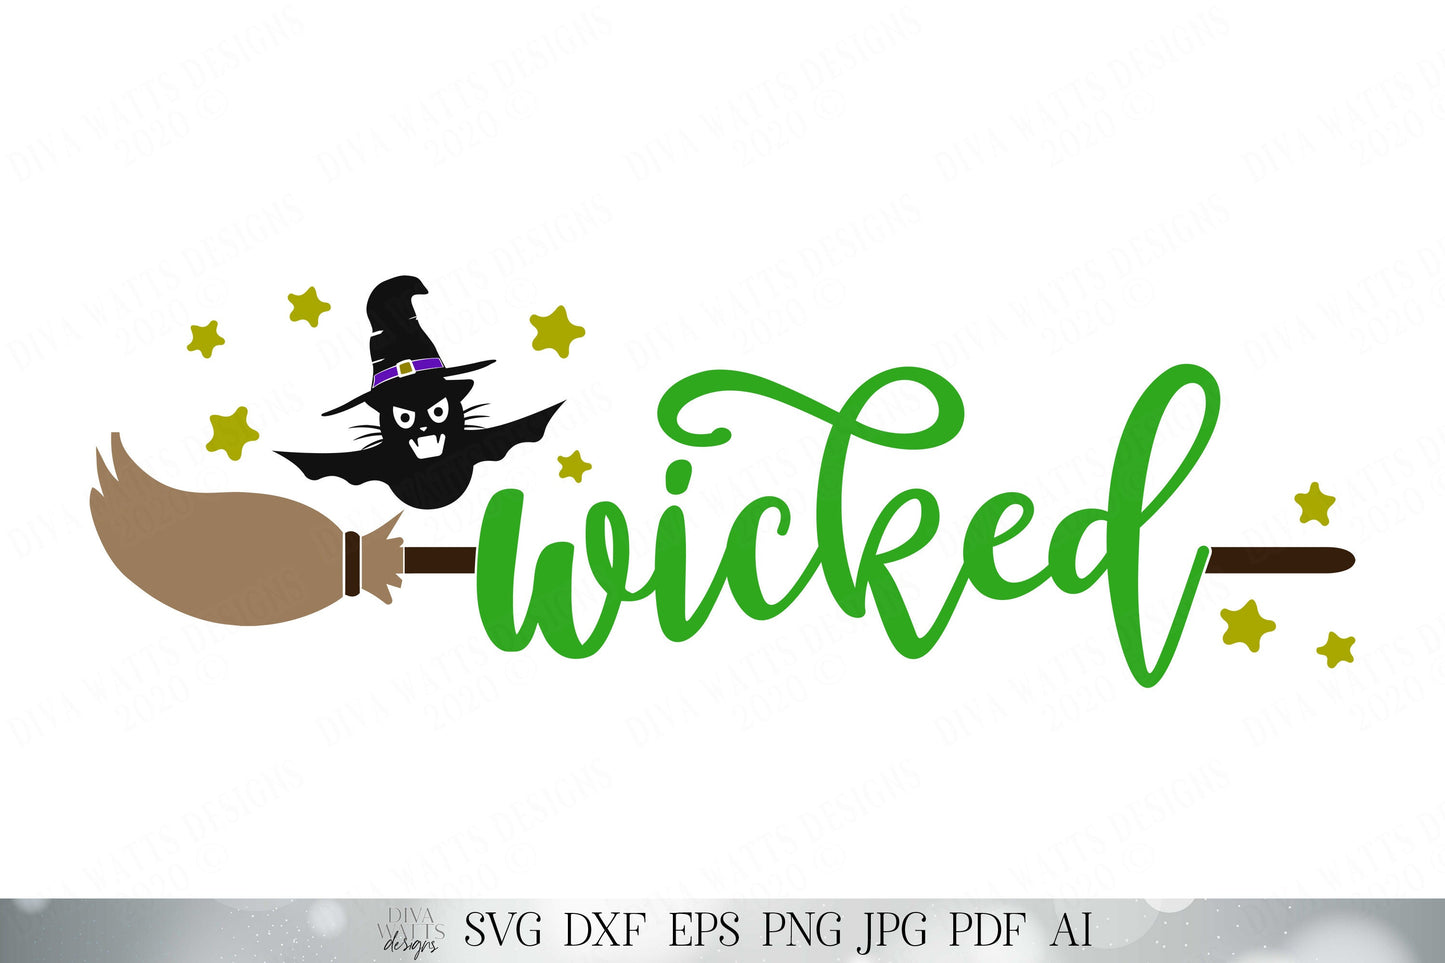 Wicked | Halloween Design | Witch Hat | Witch Broomstick | Cat | Bat | Halloween Shirt | Halloween Sign | Cutting File | SVG DXF and More!